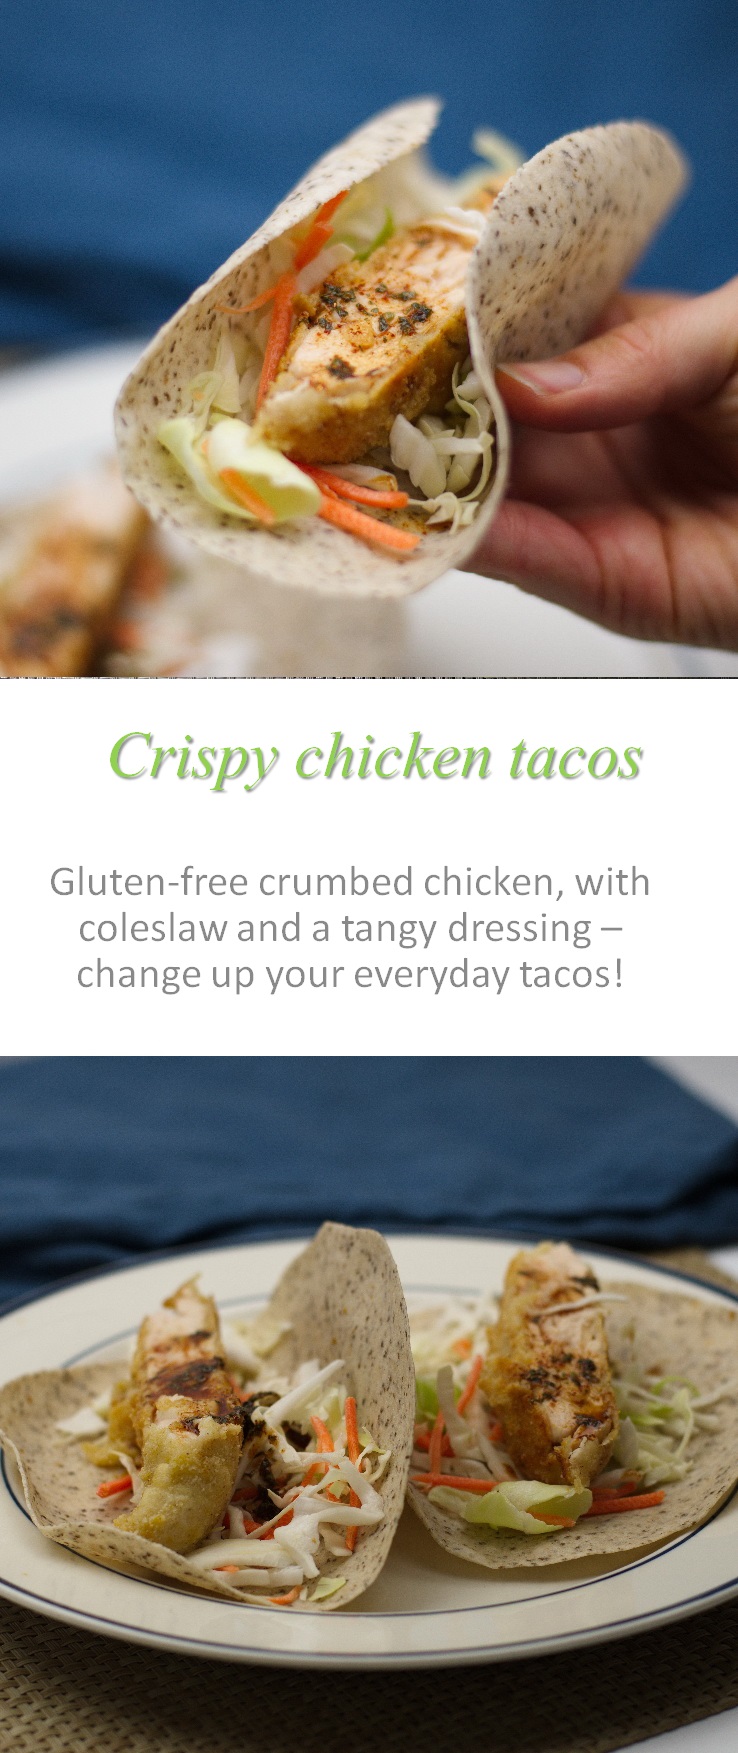 Crispy chicken strips, with a sweet honey & lime marinade, topped with coleslaw on a tortilla wraps to make a different version of tacos. These crispy chicken tacos are Yum!